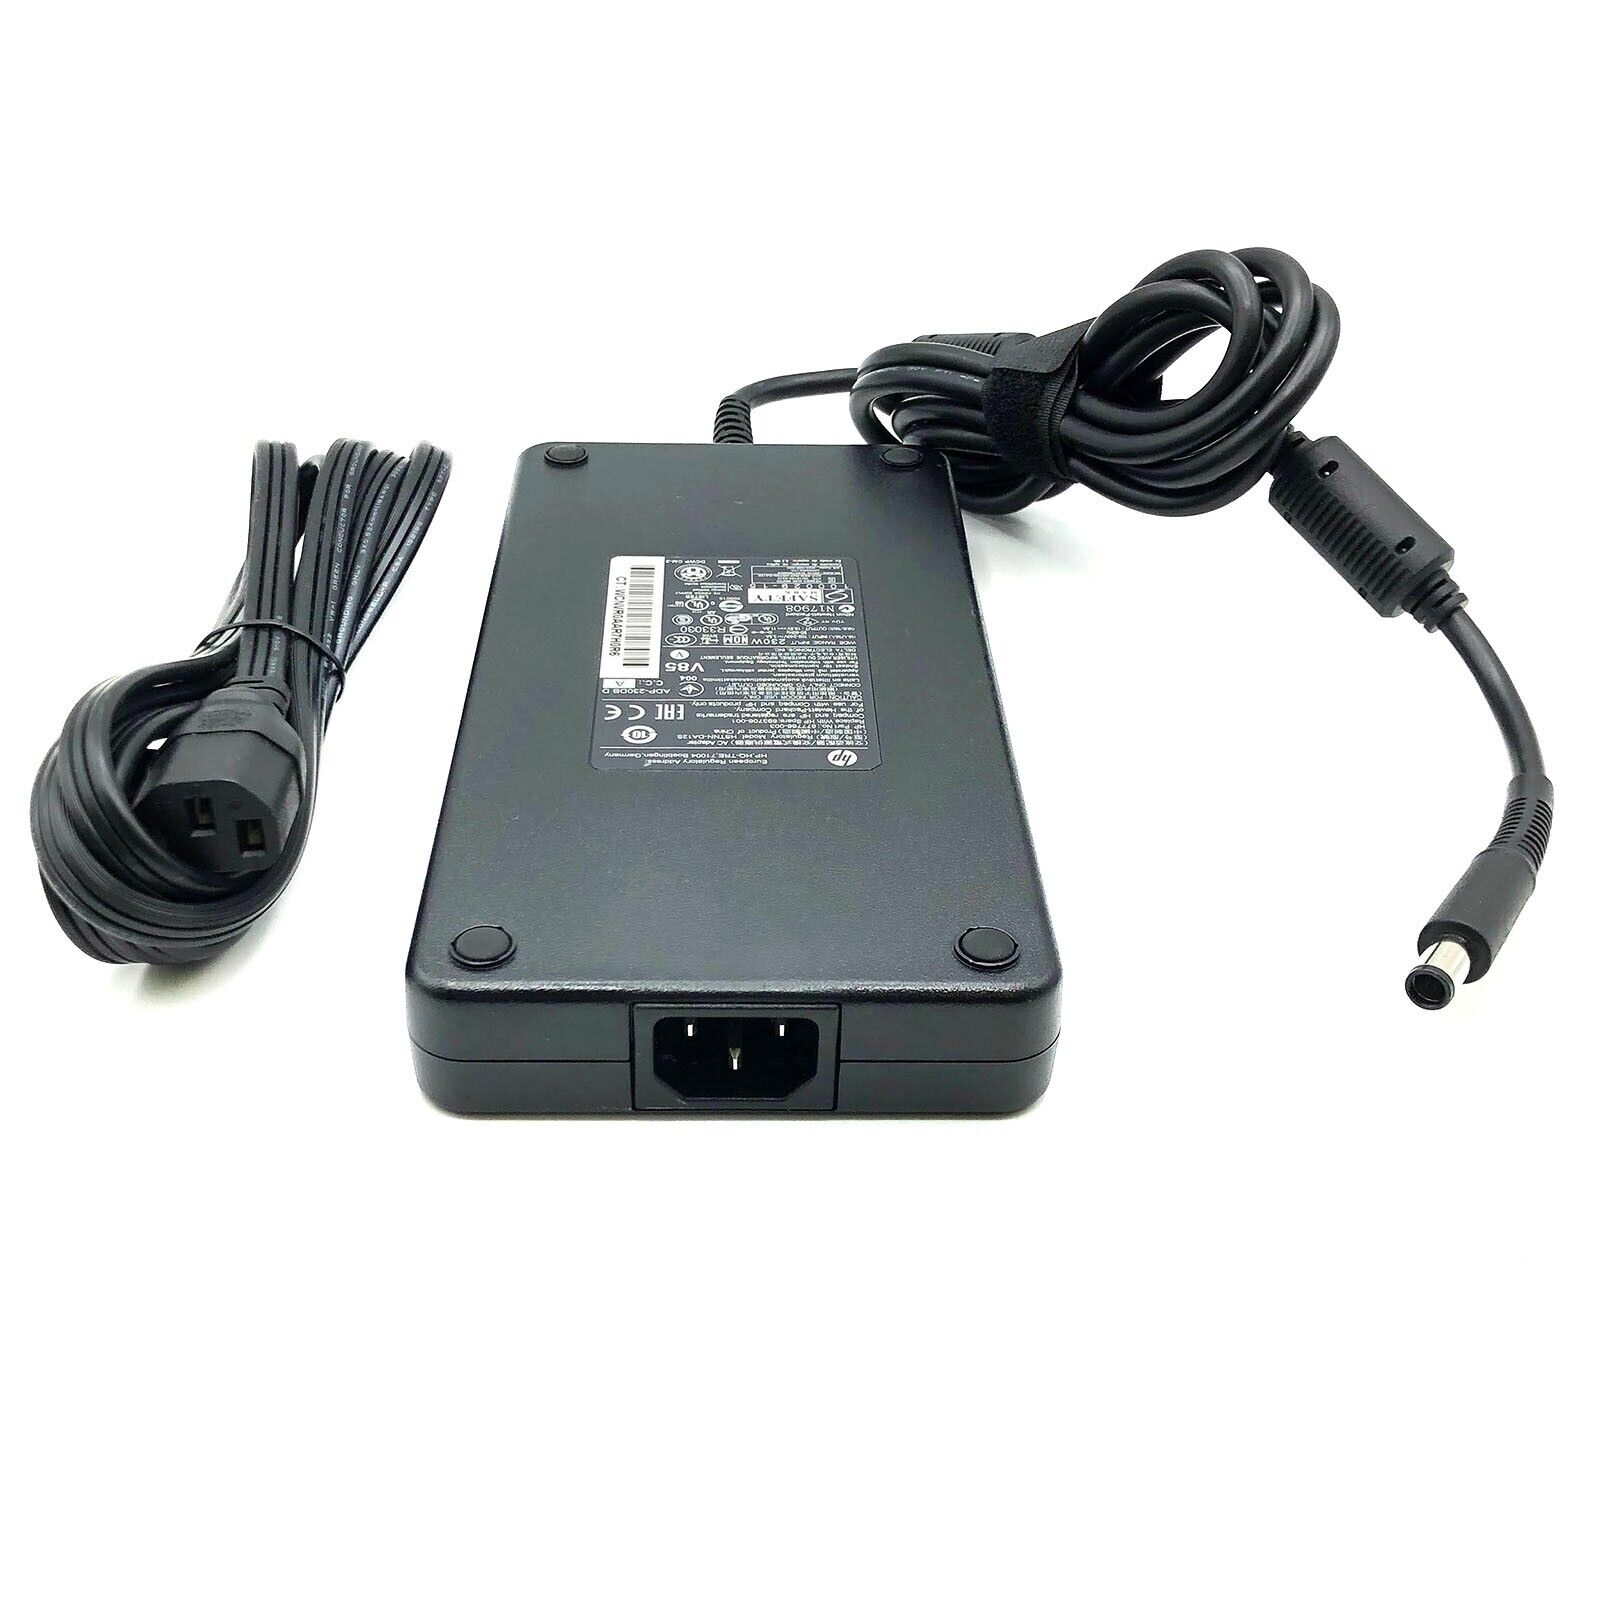 Genuine HP 230W AC DC Adapter 19.5V 11.8A P/N 693706-001 609836-001 OEM Charger